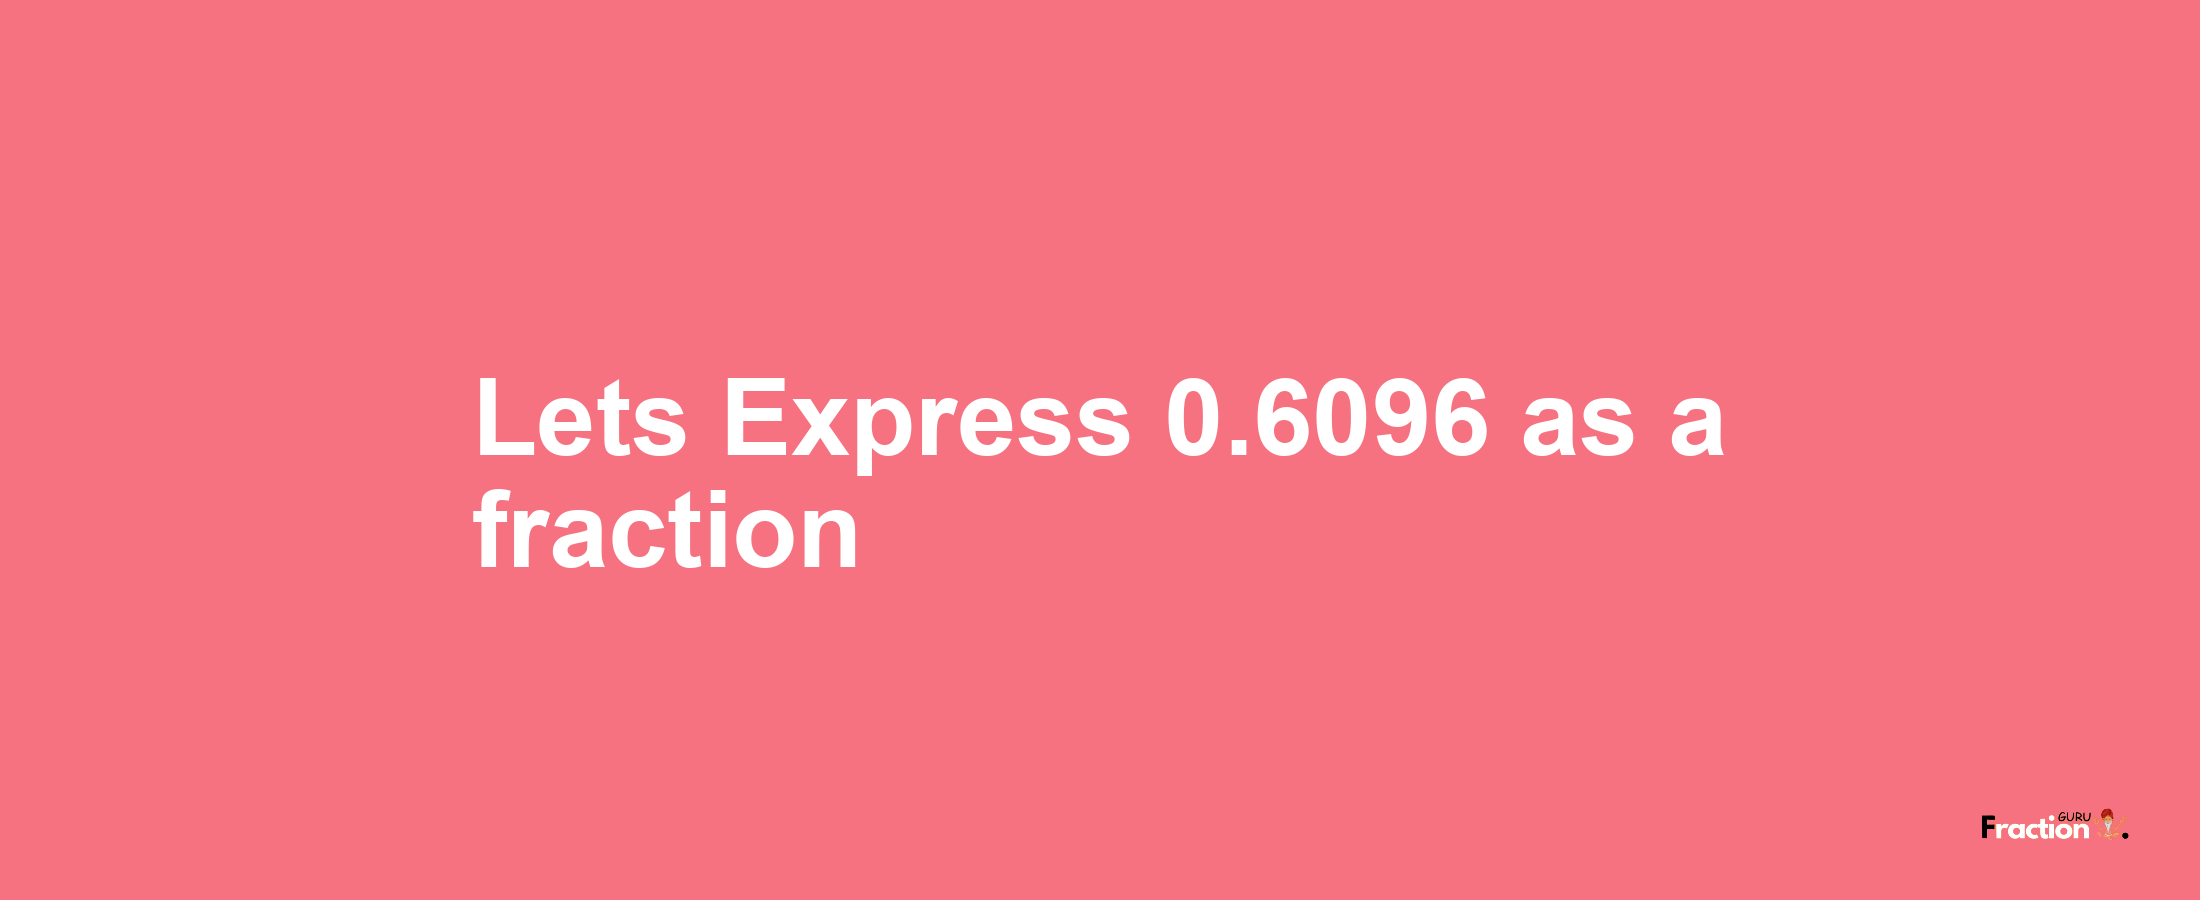 Lets Express 0.6096 as afraction